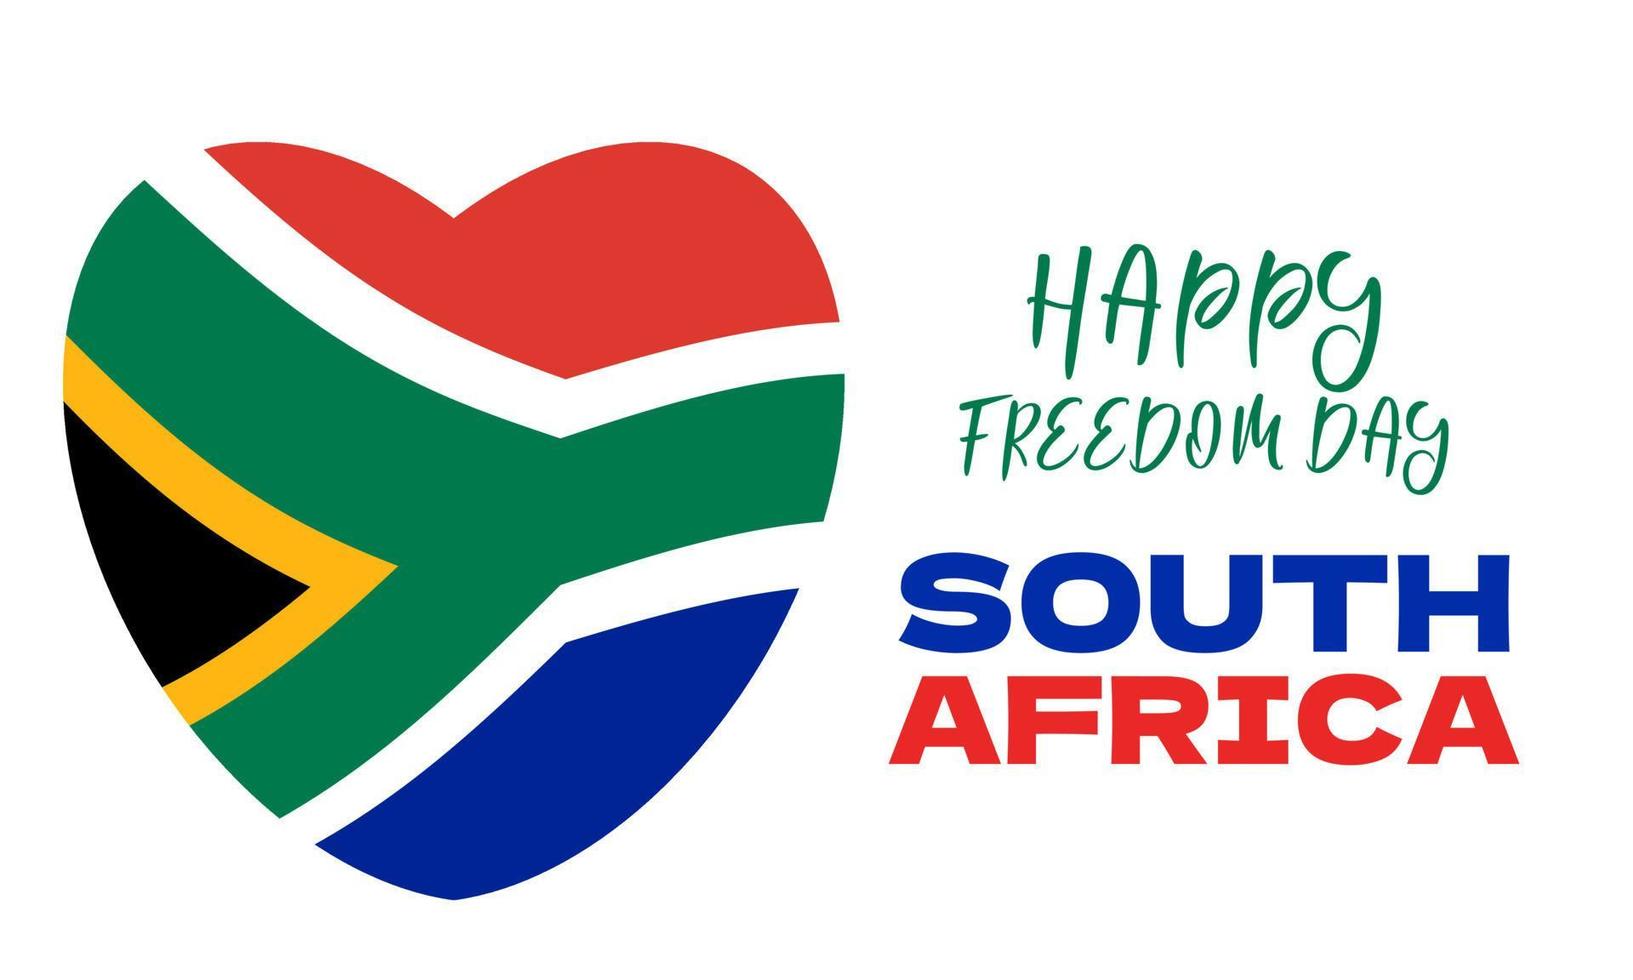 South Africa Freedom Day Afrikaans Vryheidsdag on white Background, poster, card, banner design. vector